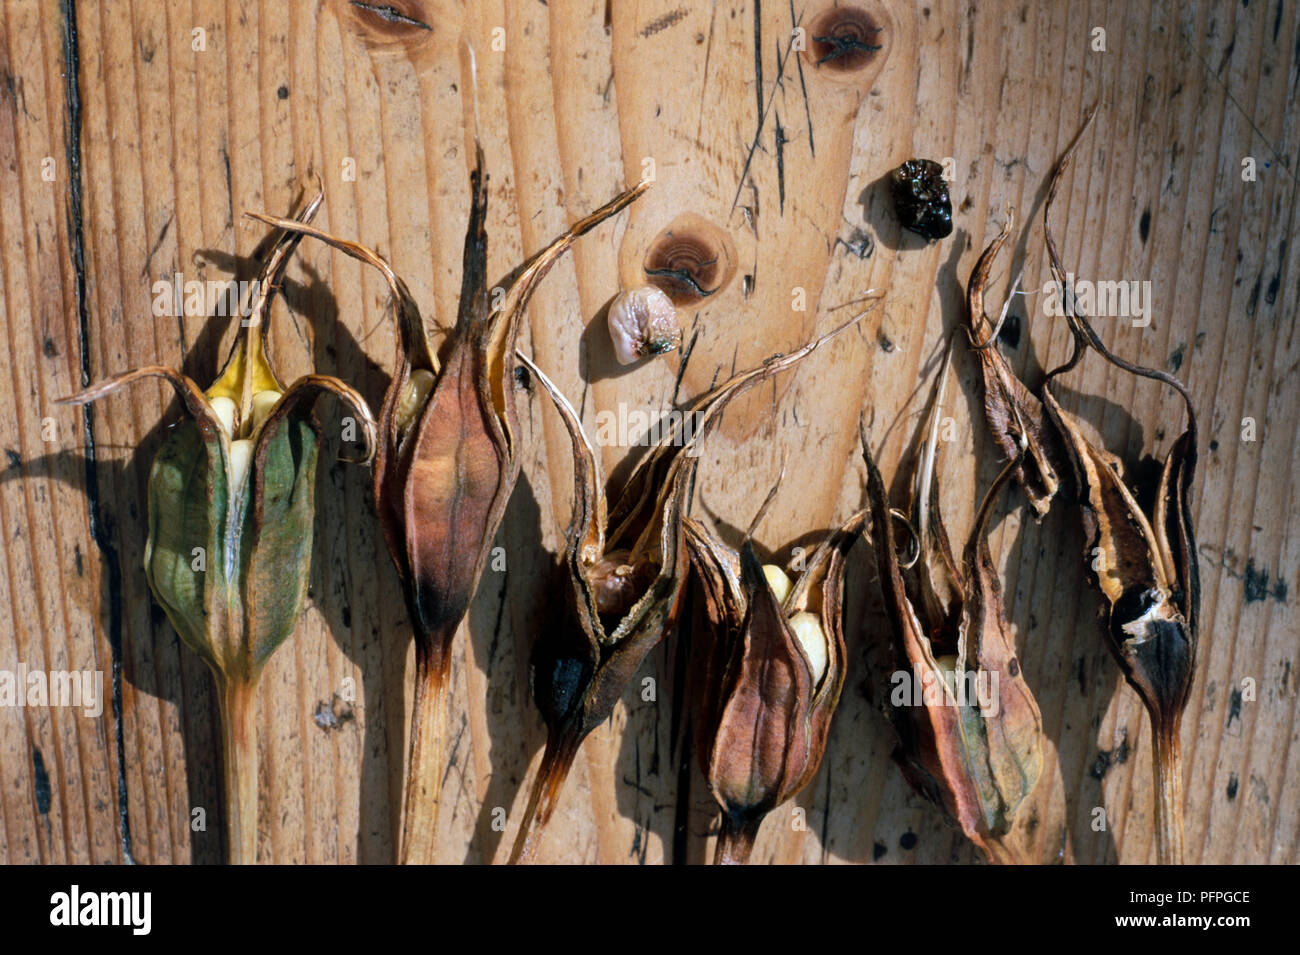 Iris orientalis (Yellowband iris), dried seed capsules on wooden table, close-up Stock Photo